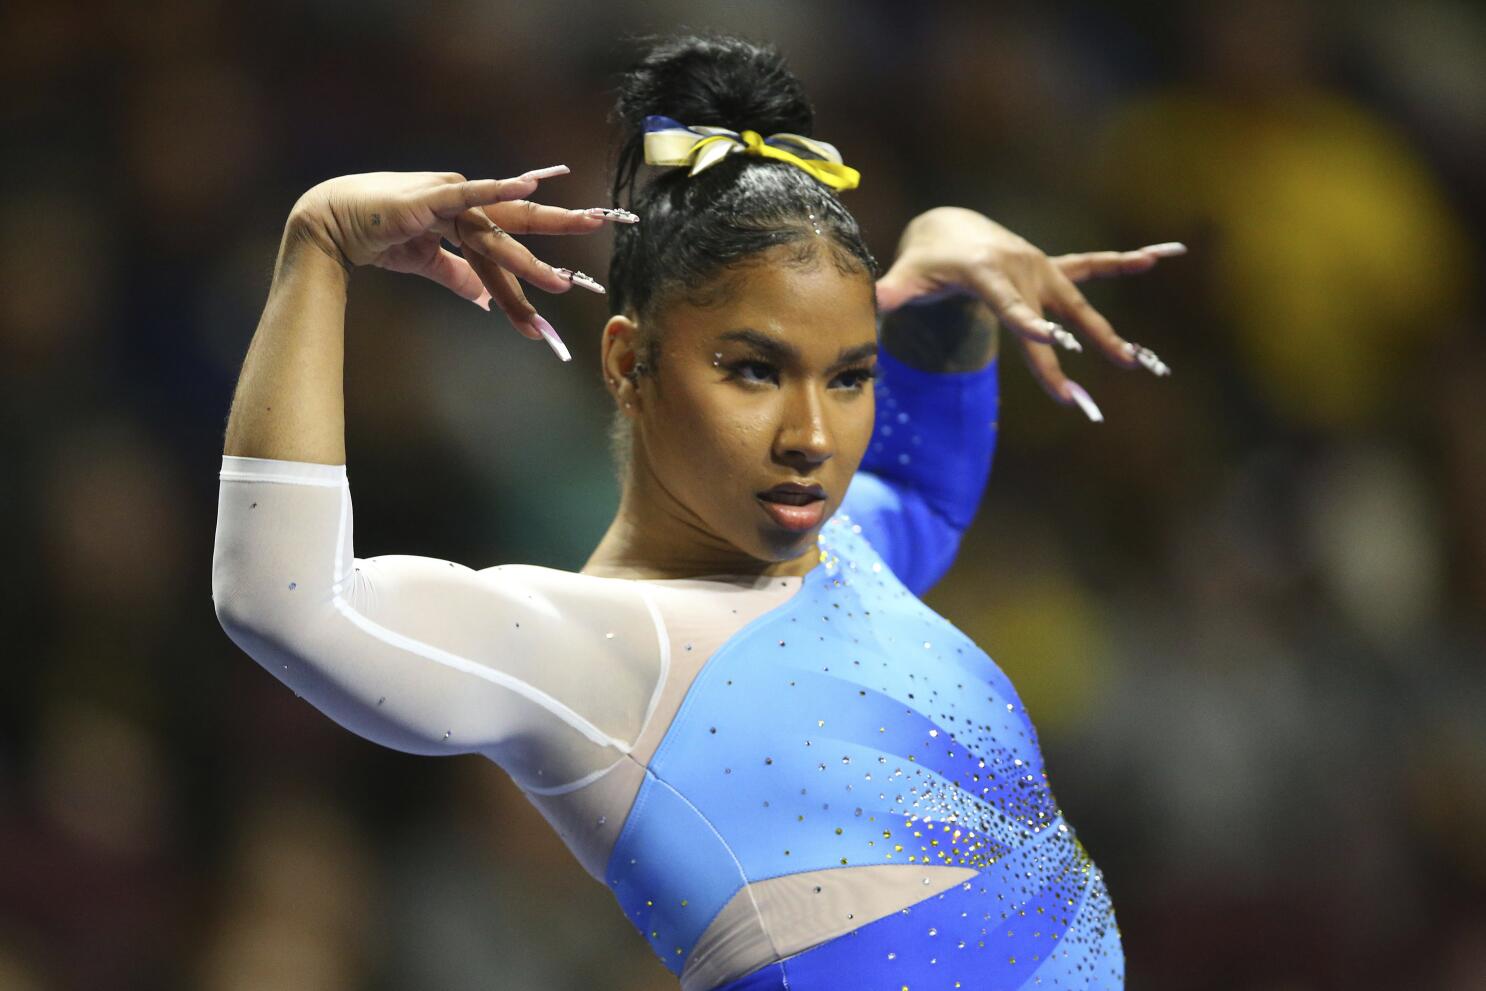 UCLA gymnast Jordan Chiles turns focus to a second Olympics - Los